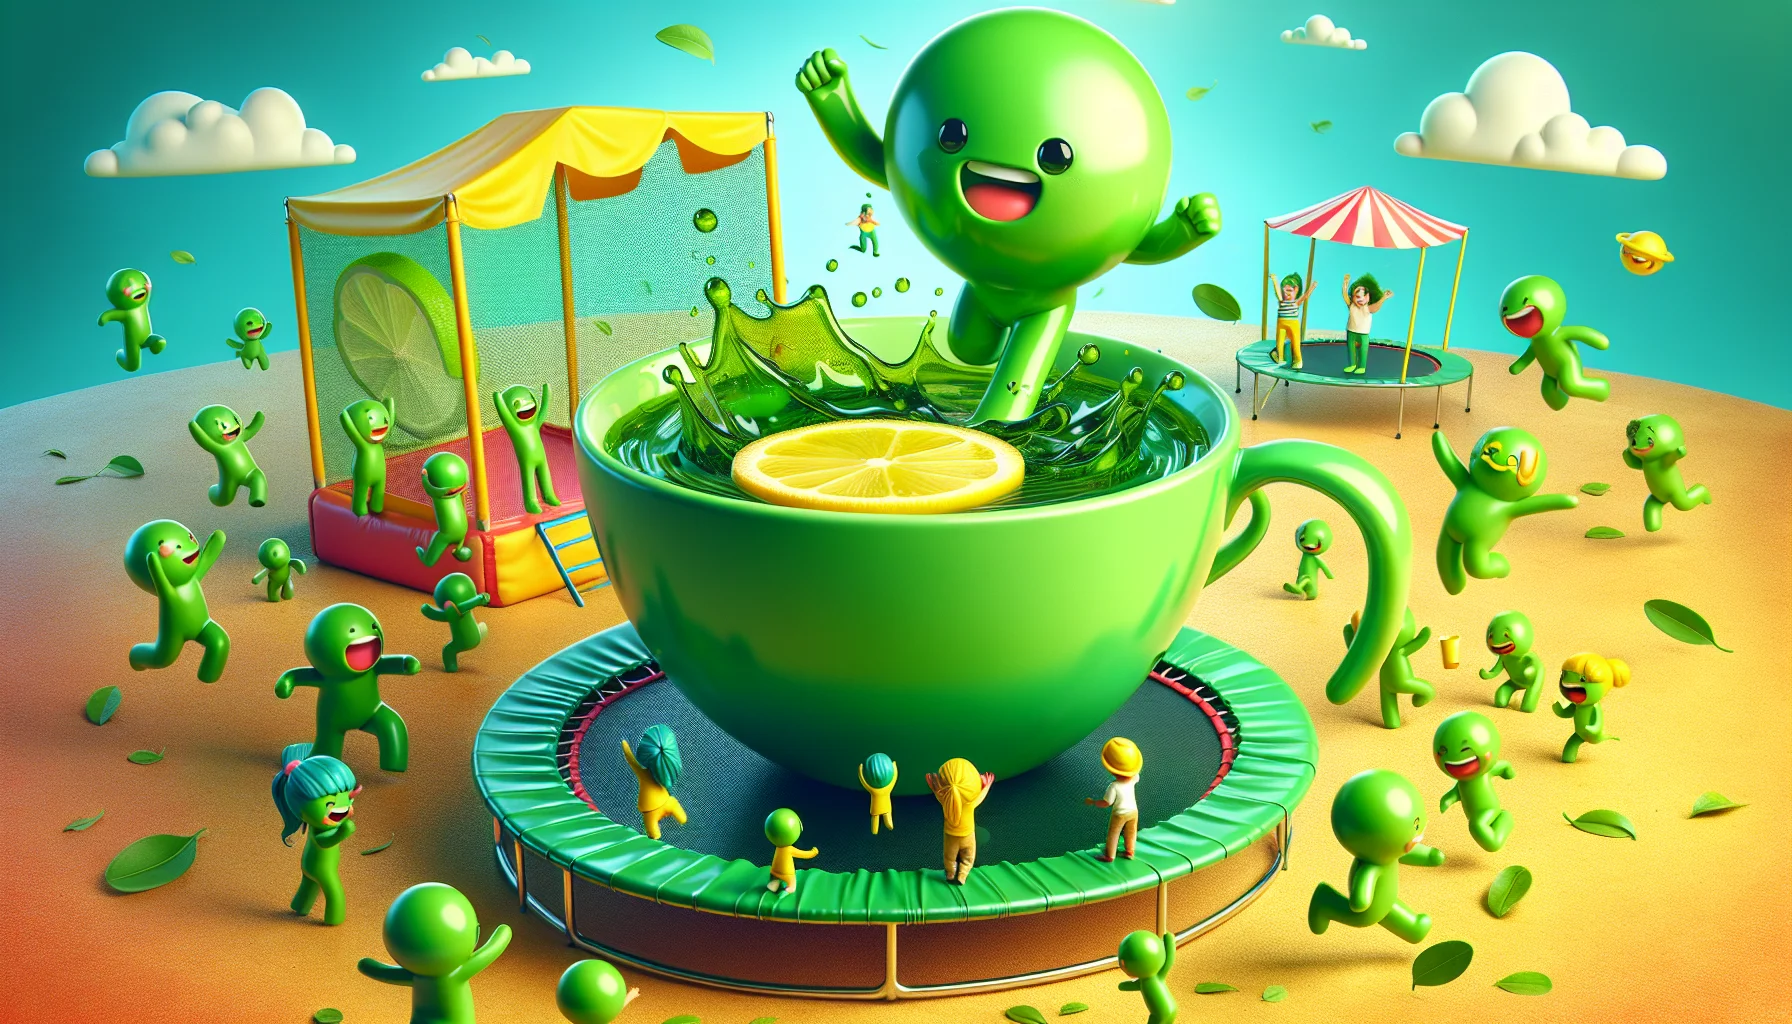 Create a surreal image where a bright green tea cup with a glossy texture, filled to the brim with steaming green tea and a slice of yellow lemon floating on the surface, is cheerfully interacting with a group of mini cartoon-style humans. The adventurous tea cup is energetically jumping on a trampoline, splashing tiny drops of green tea that the mini humans are trying to catch with their cups, their faces filled with excitement and laughter. The whole scene is set in a colorful park under a clear blue sky. The image gives a lively, enticing feeling, encouraging people to have fun and enjoy green tea with lemon.